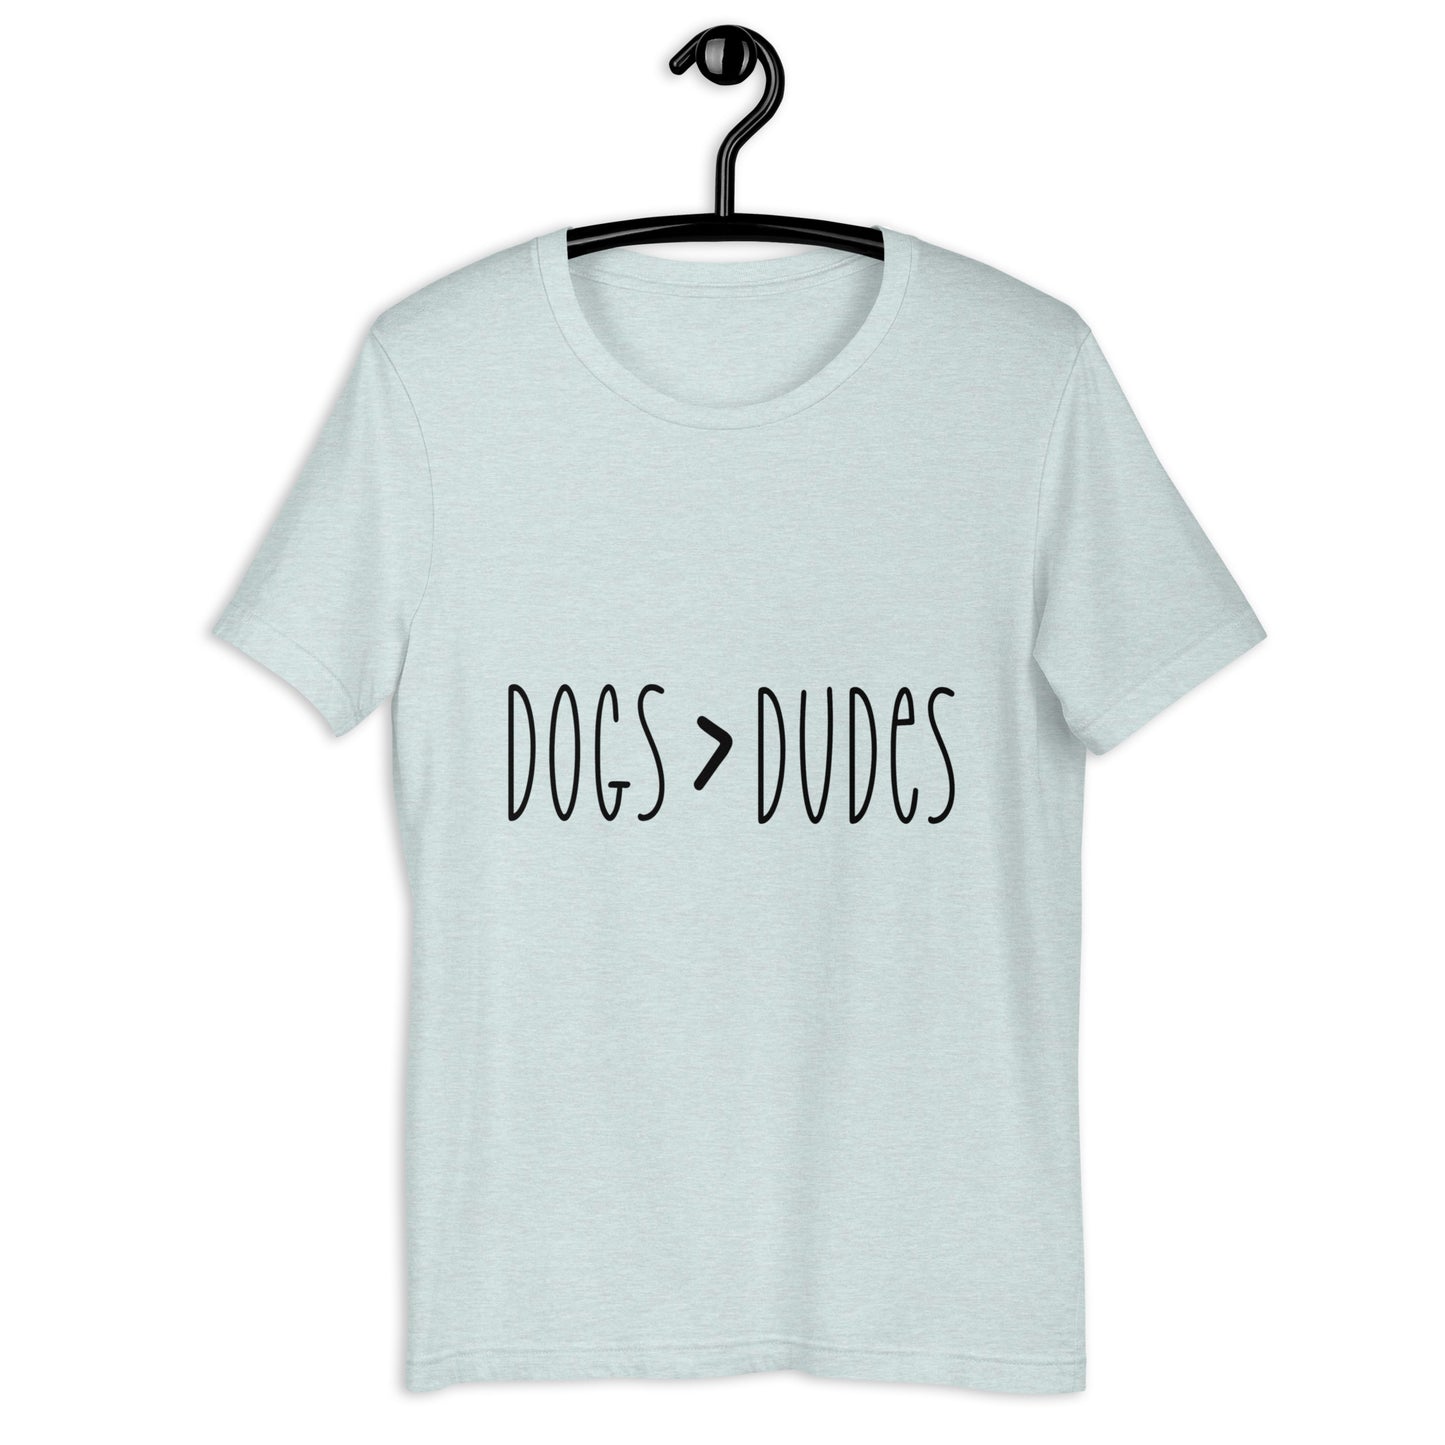 DOGS > DUDES